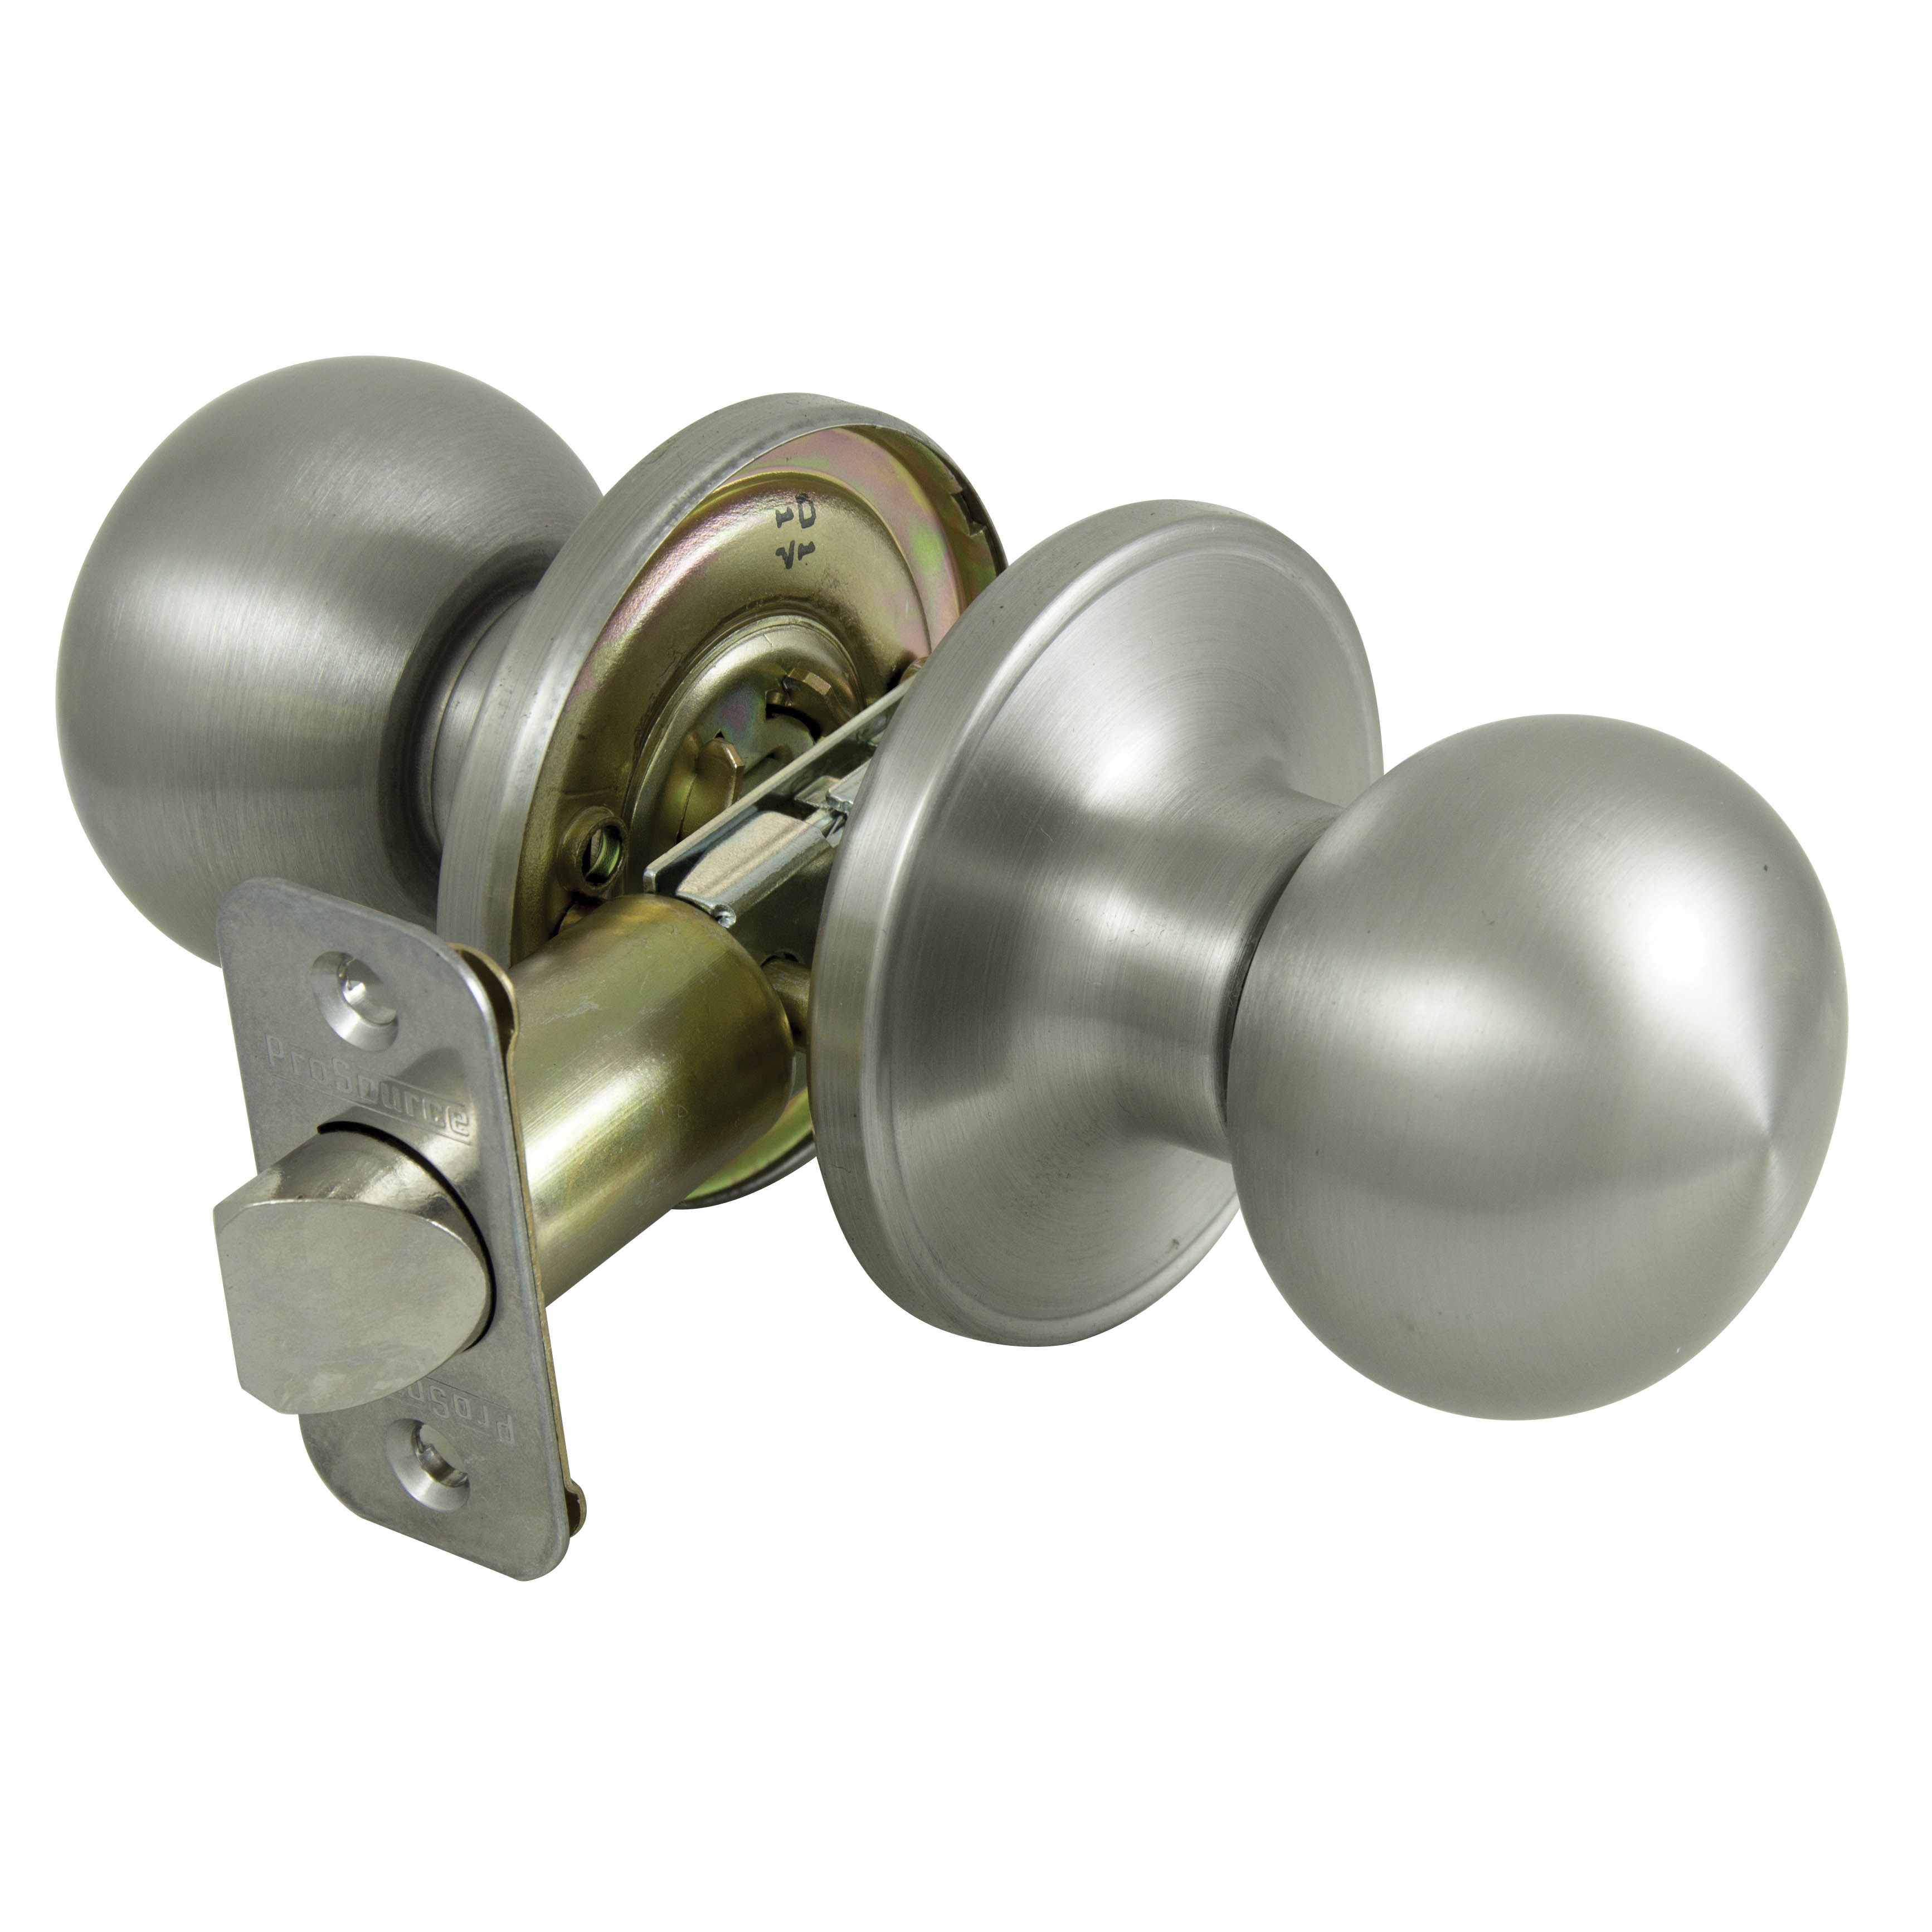 T9630BRA4V Passage Knob, Metal, Stainless Steel, 2-3/8 to 2-3/4 in Backset, 1-3/8 to 1-3/4 in Thick Door